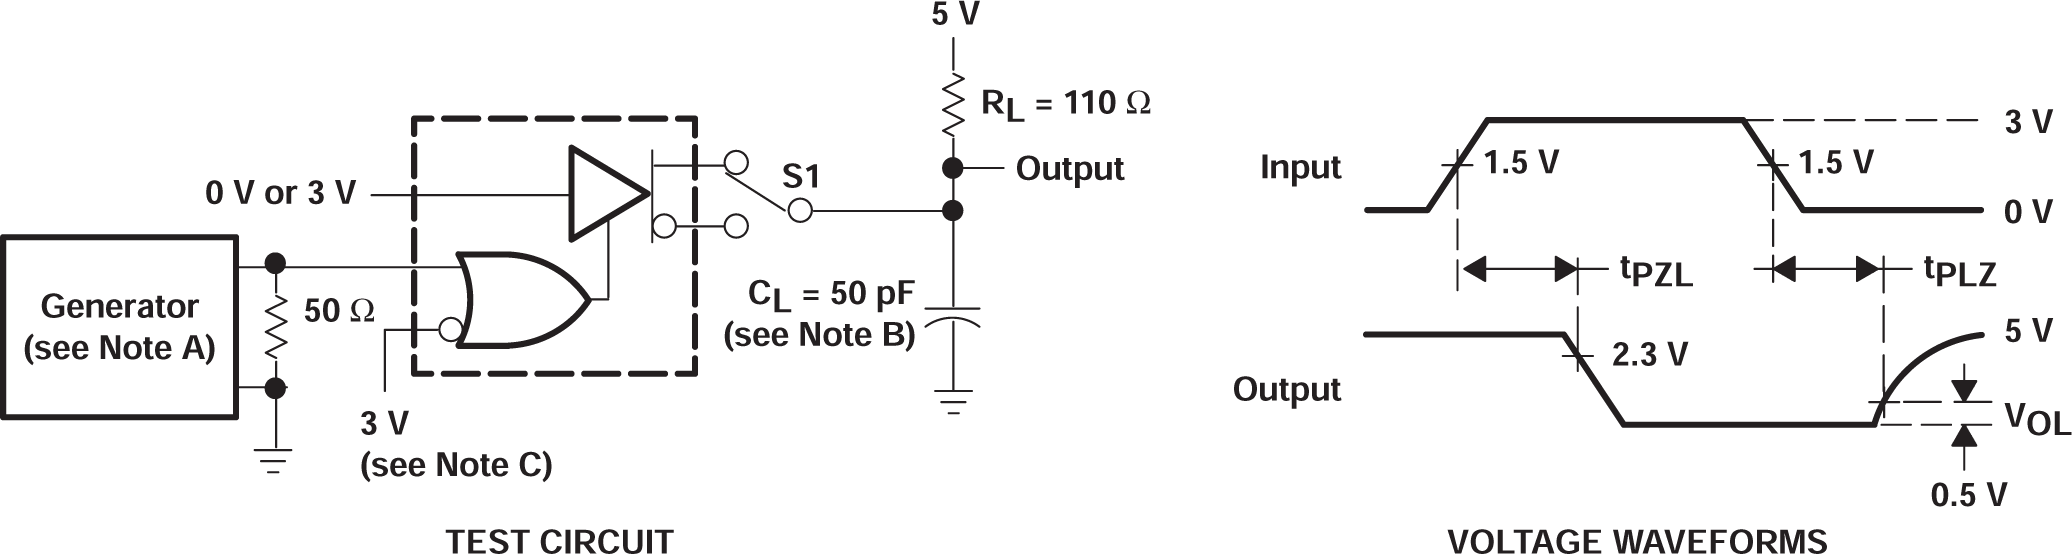 SN75ALS172A Test Circuit and Voltage
                    Waveforms, TPZL and TPLZ